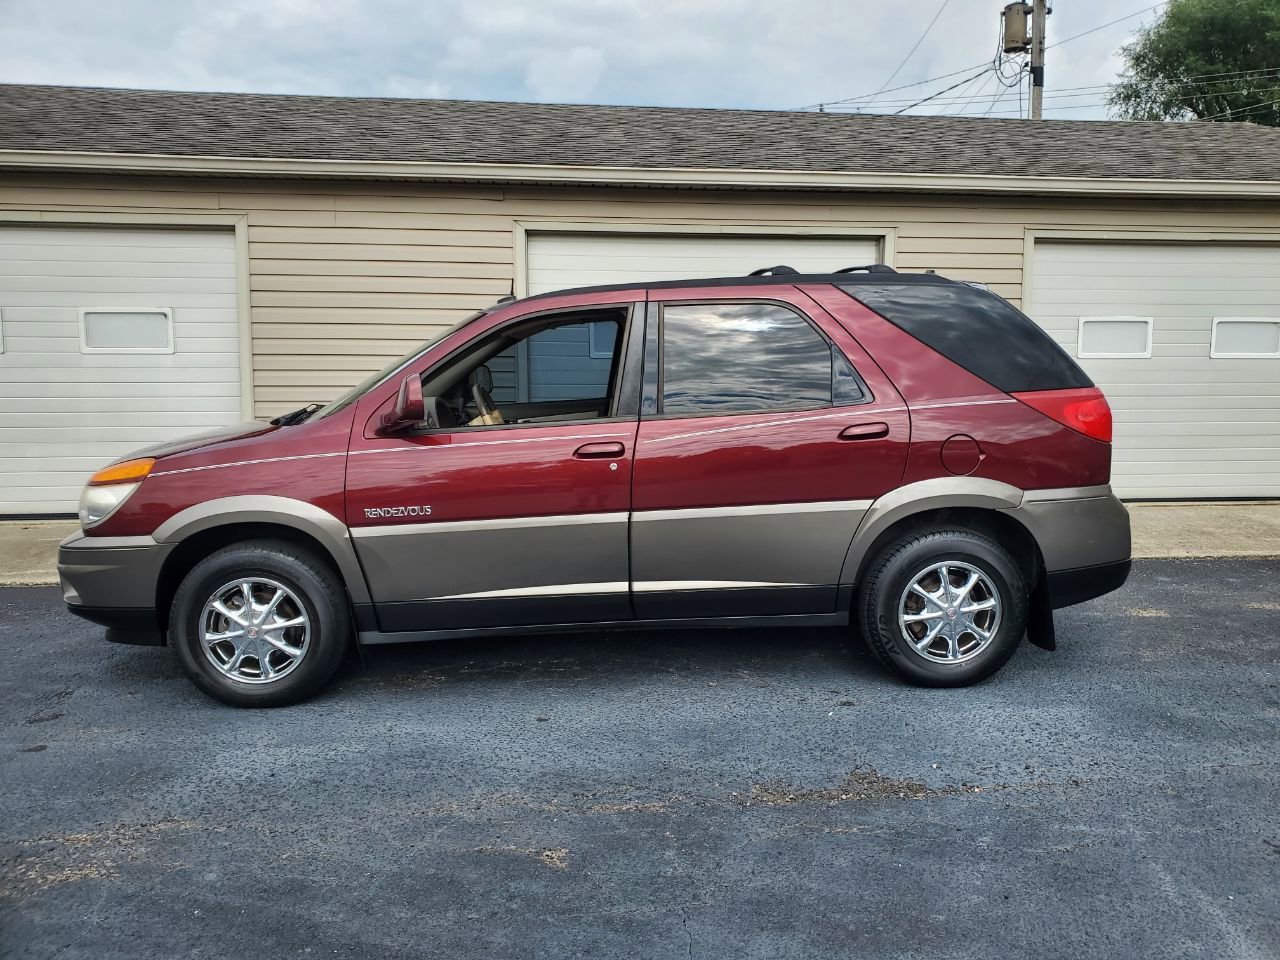 Buick Rendezvous for Sale in Carmel, IN (Test Drive at Home) - Kelley Blue  Book